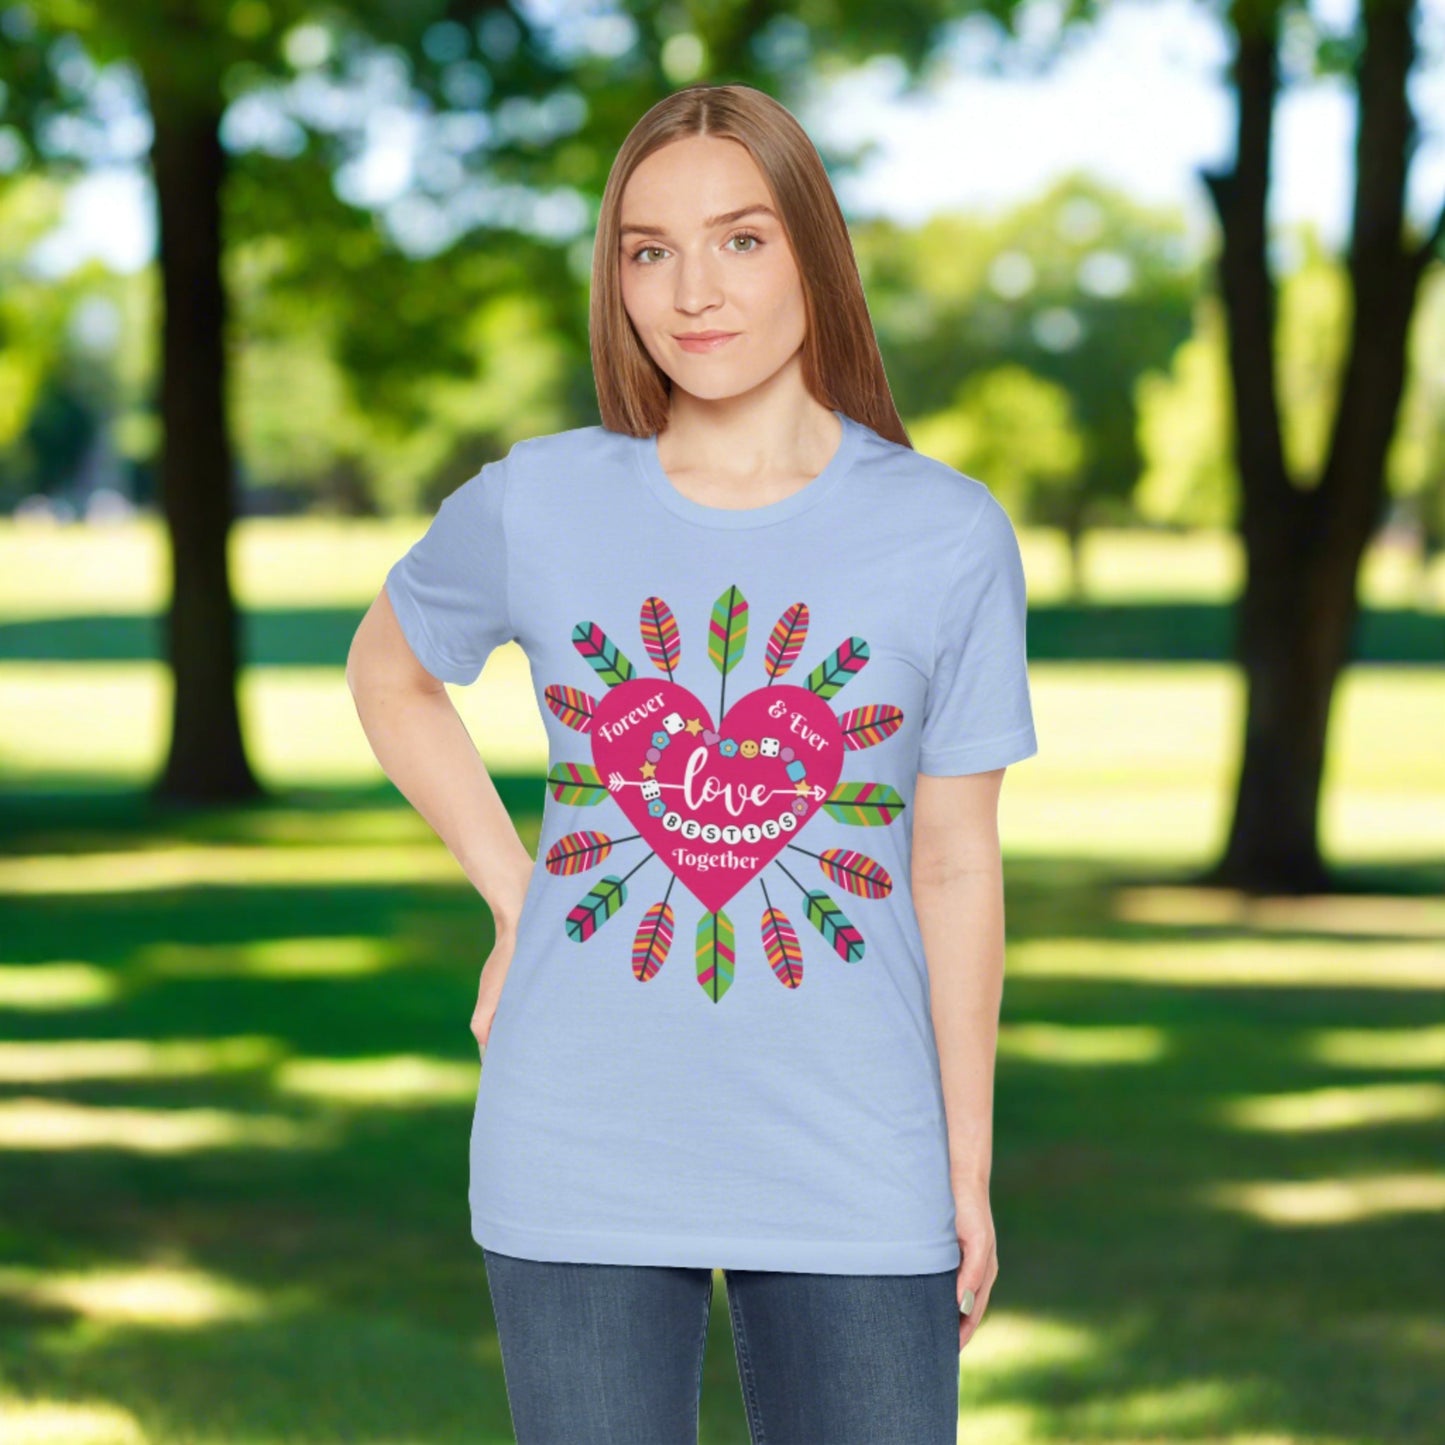 inside a pink heart is the message Besties Forever Together Love is the message on this light blue tee with a feather dream catcher surrounding the shape of a pink heart